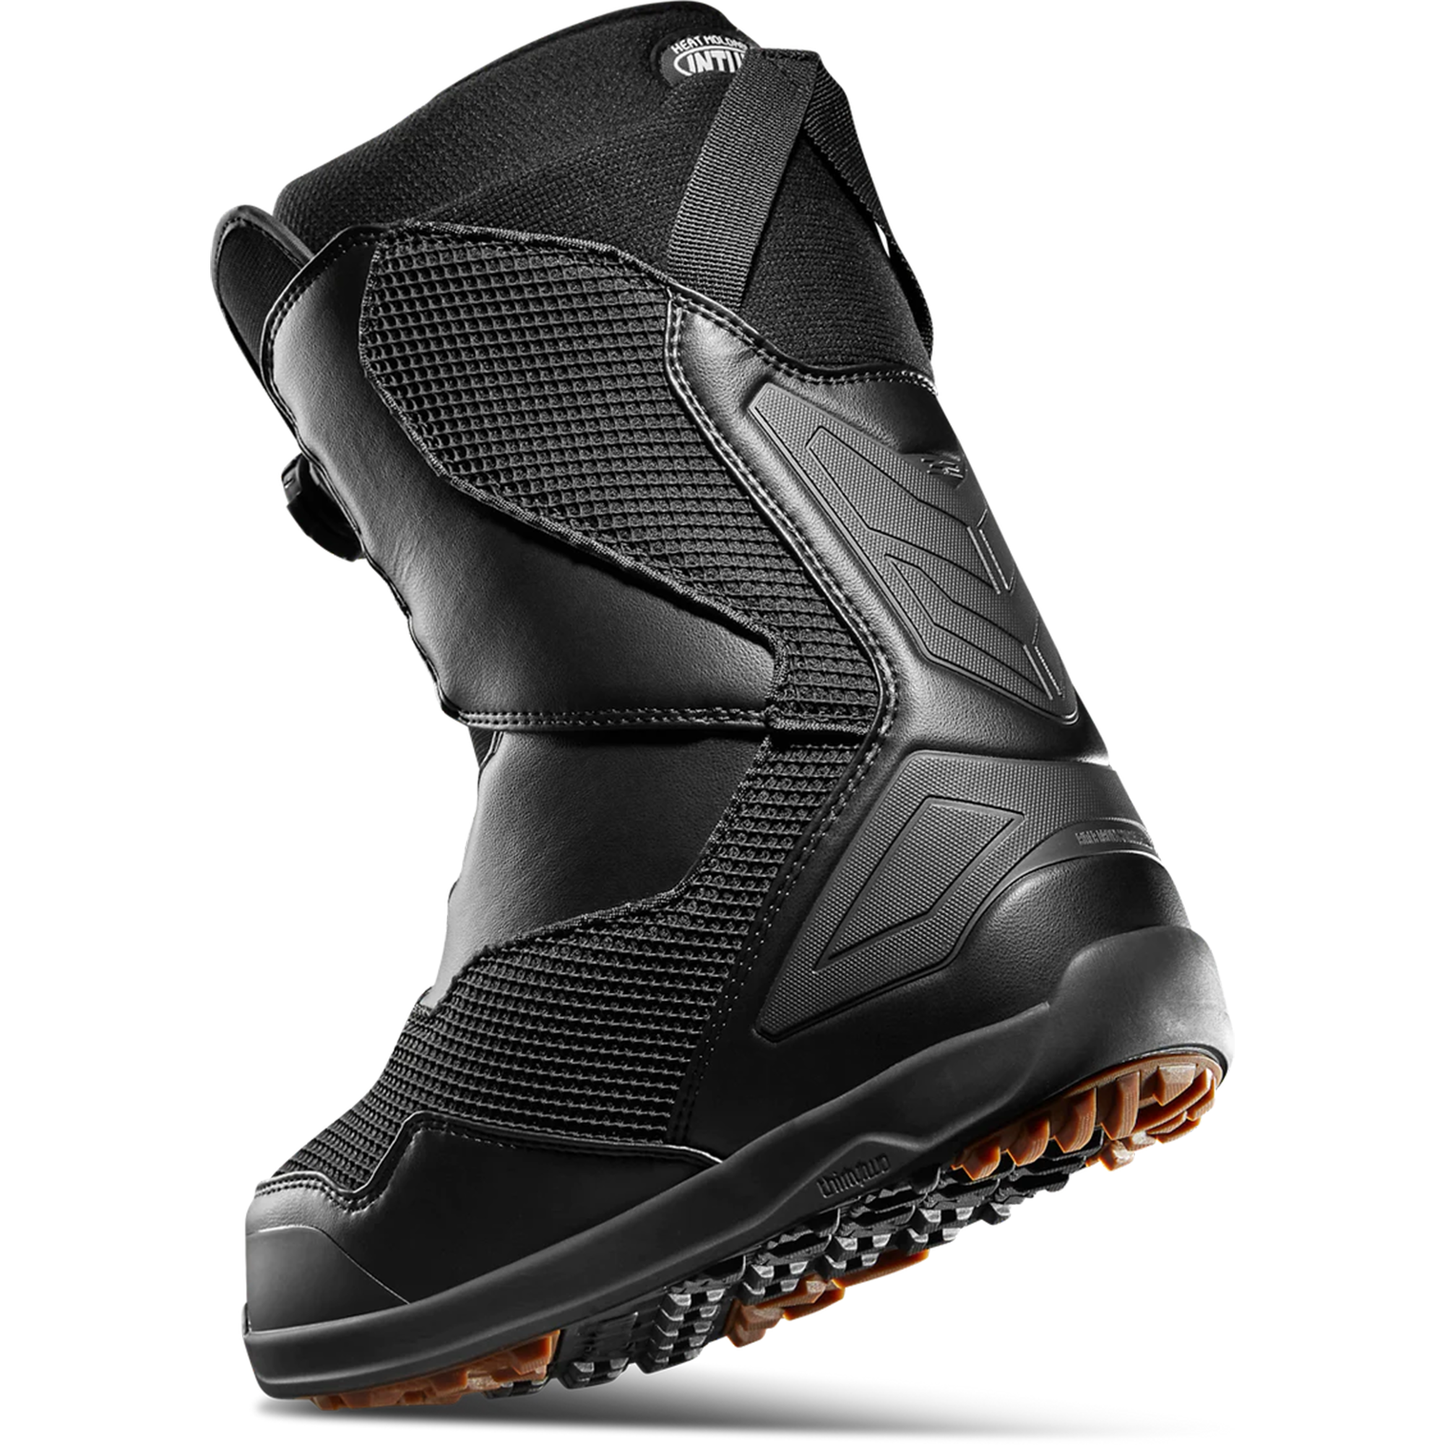 ThirtyTwo TM-2 Double BOA Snowboard Boots Black Snowboard Boots